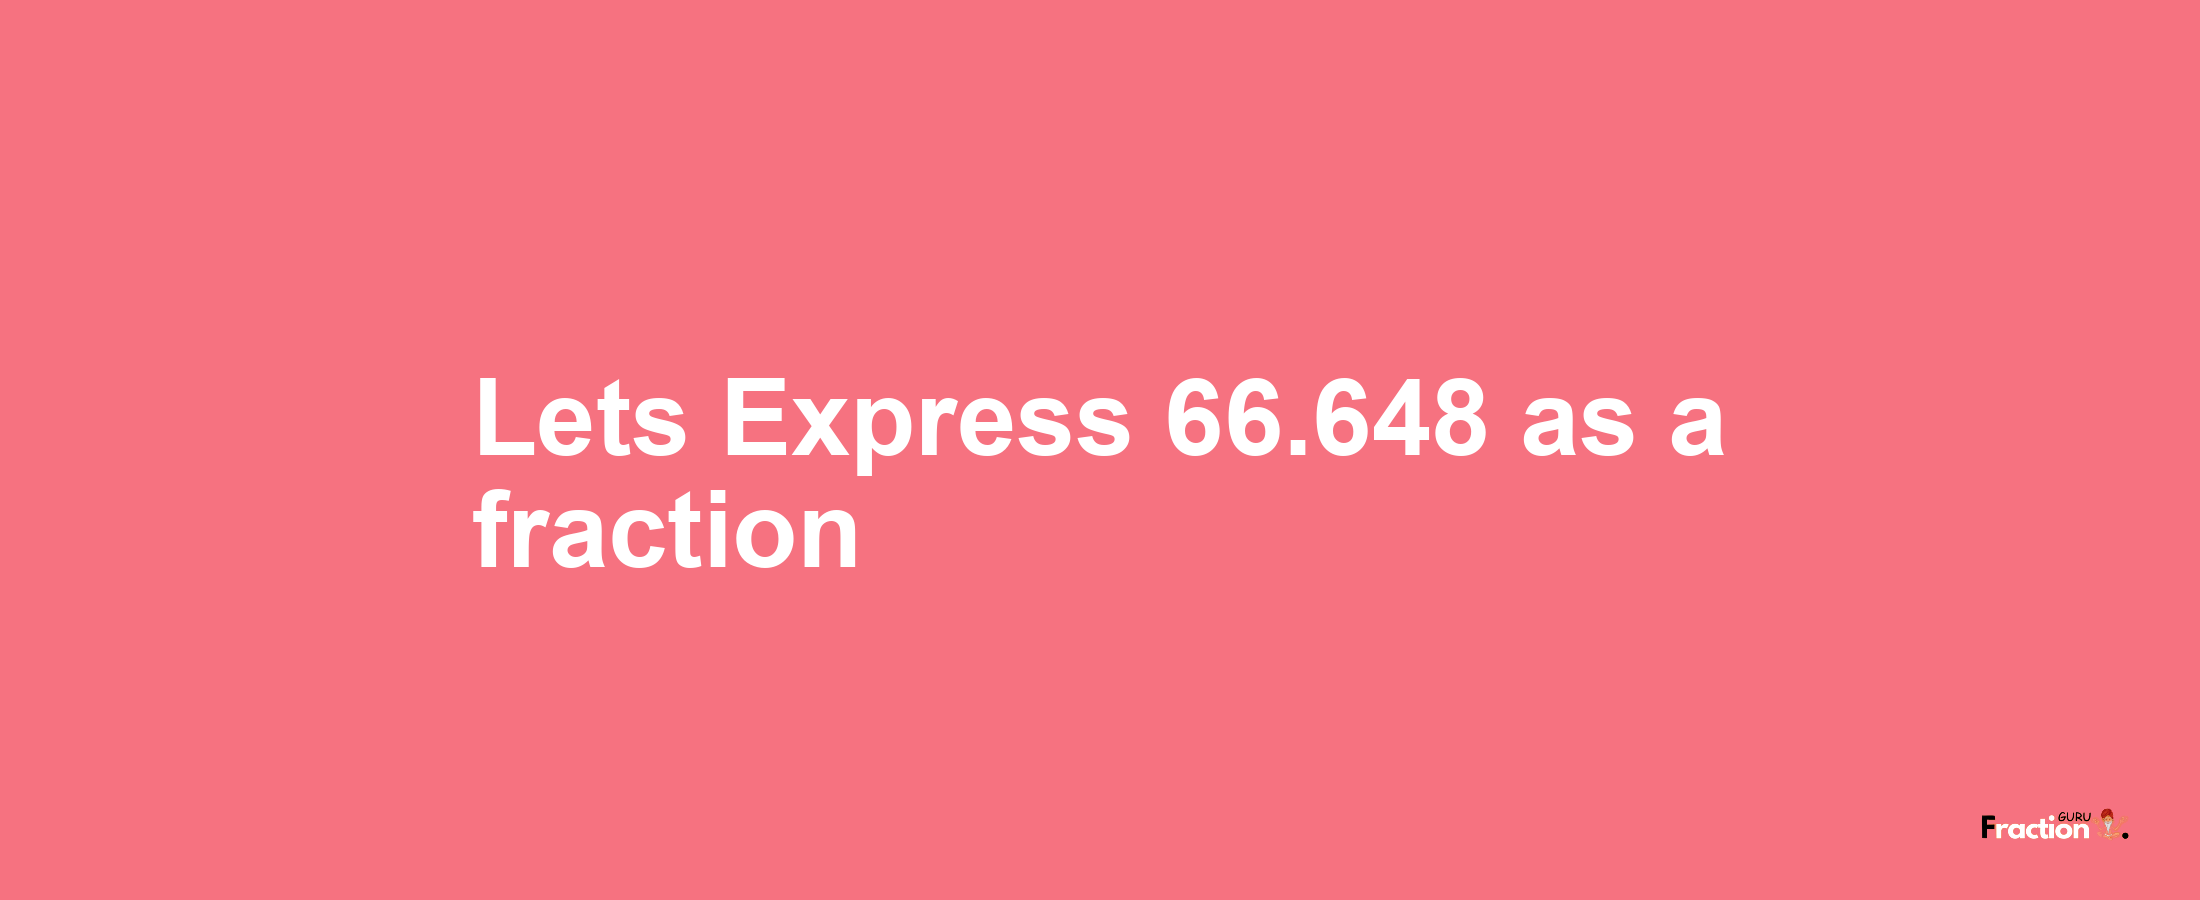 Lets Express 66.648 as afraction